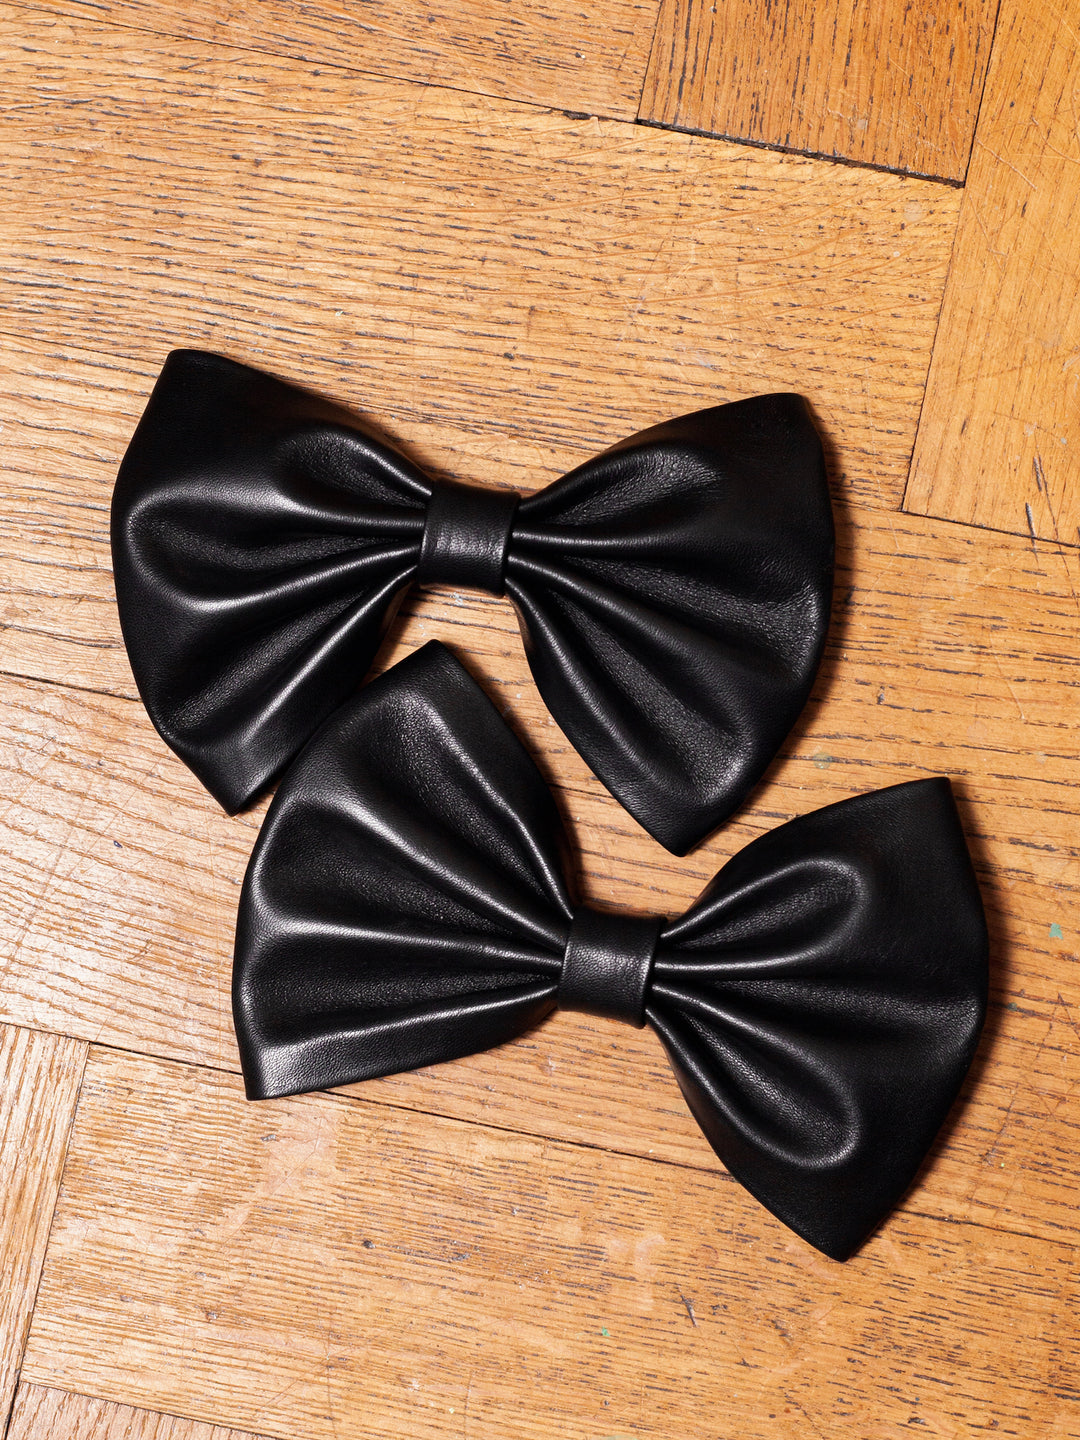 Blankens clip-on bows in black leather